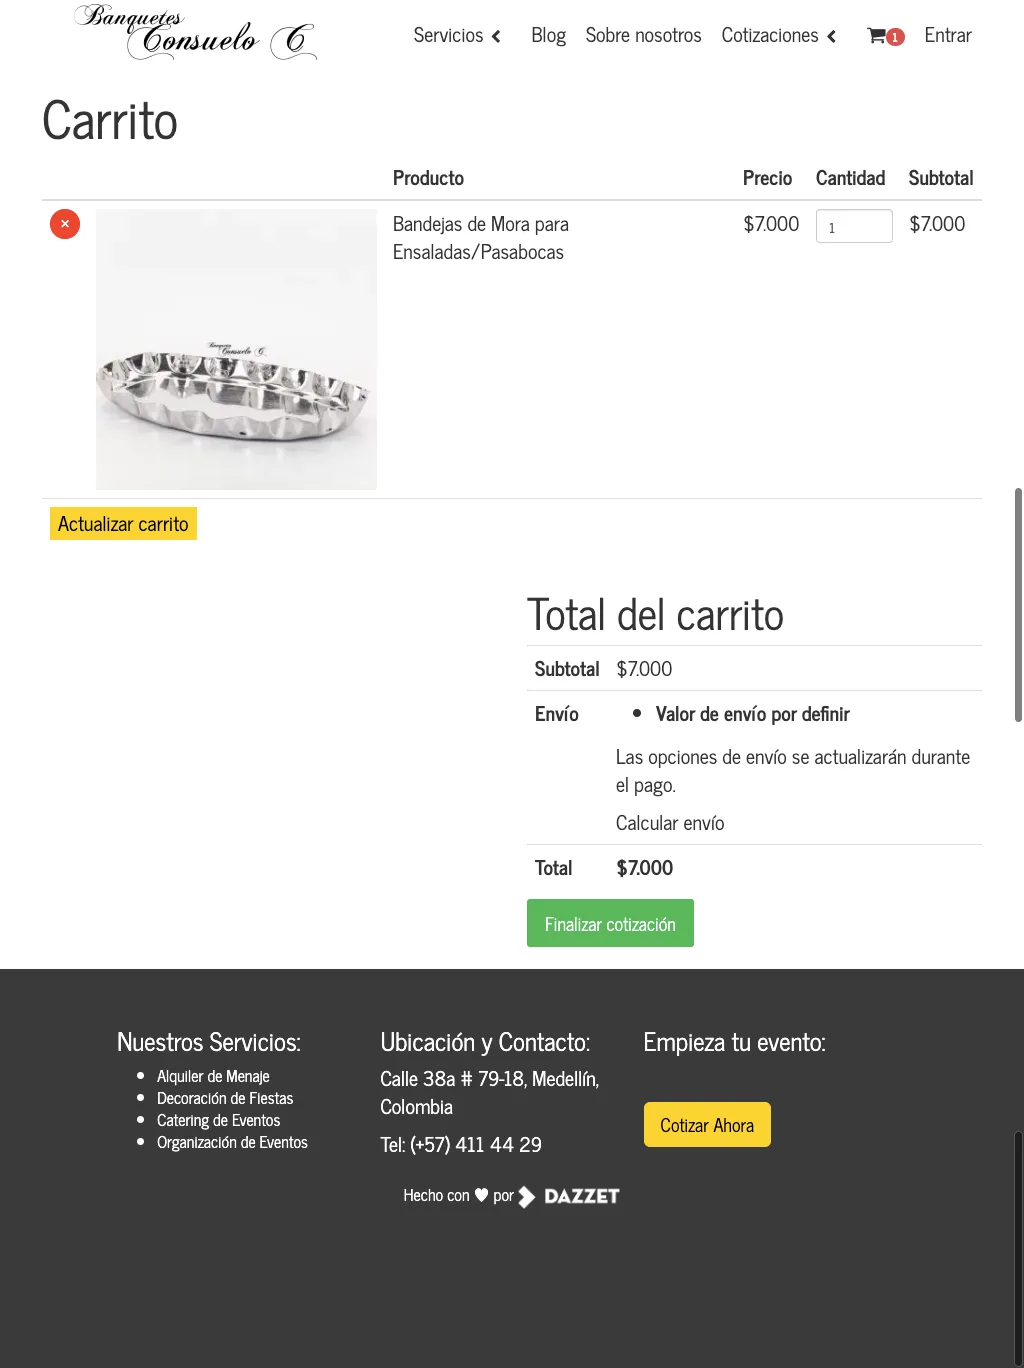 Banquetes Consuelo C Cart page